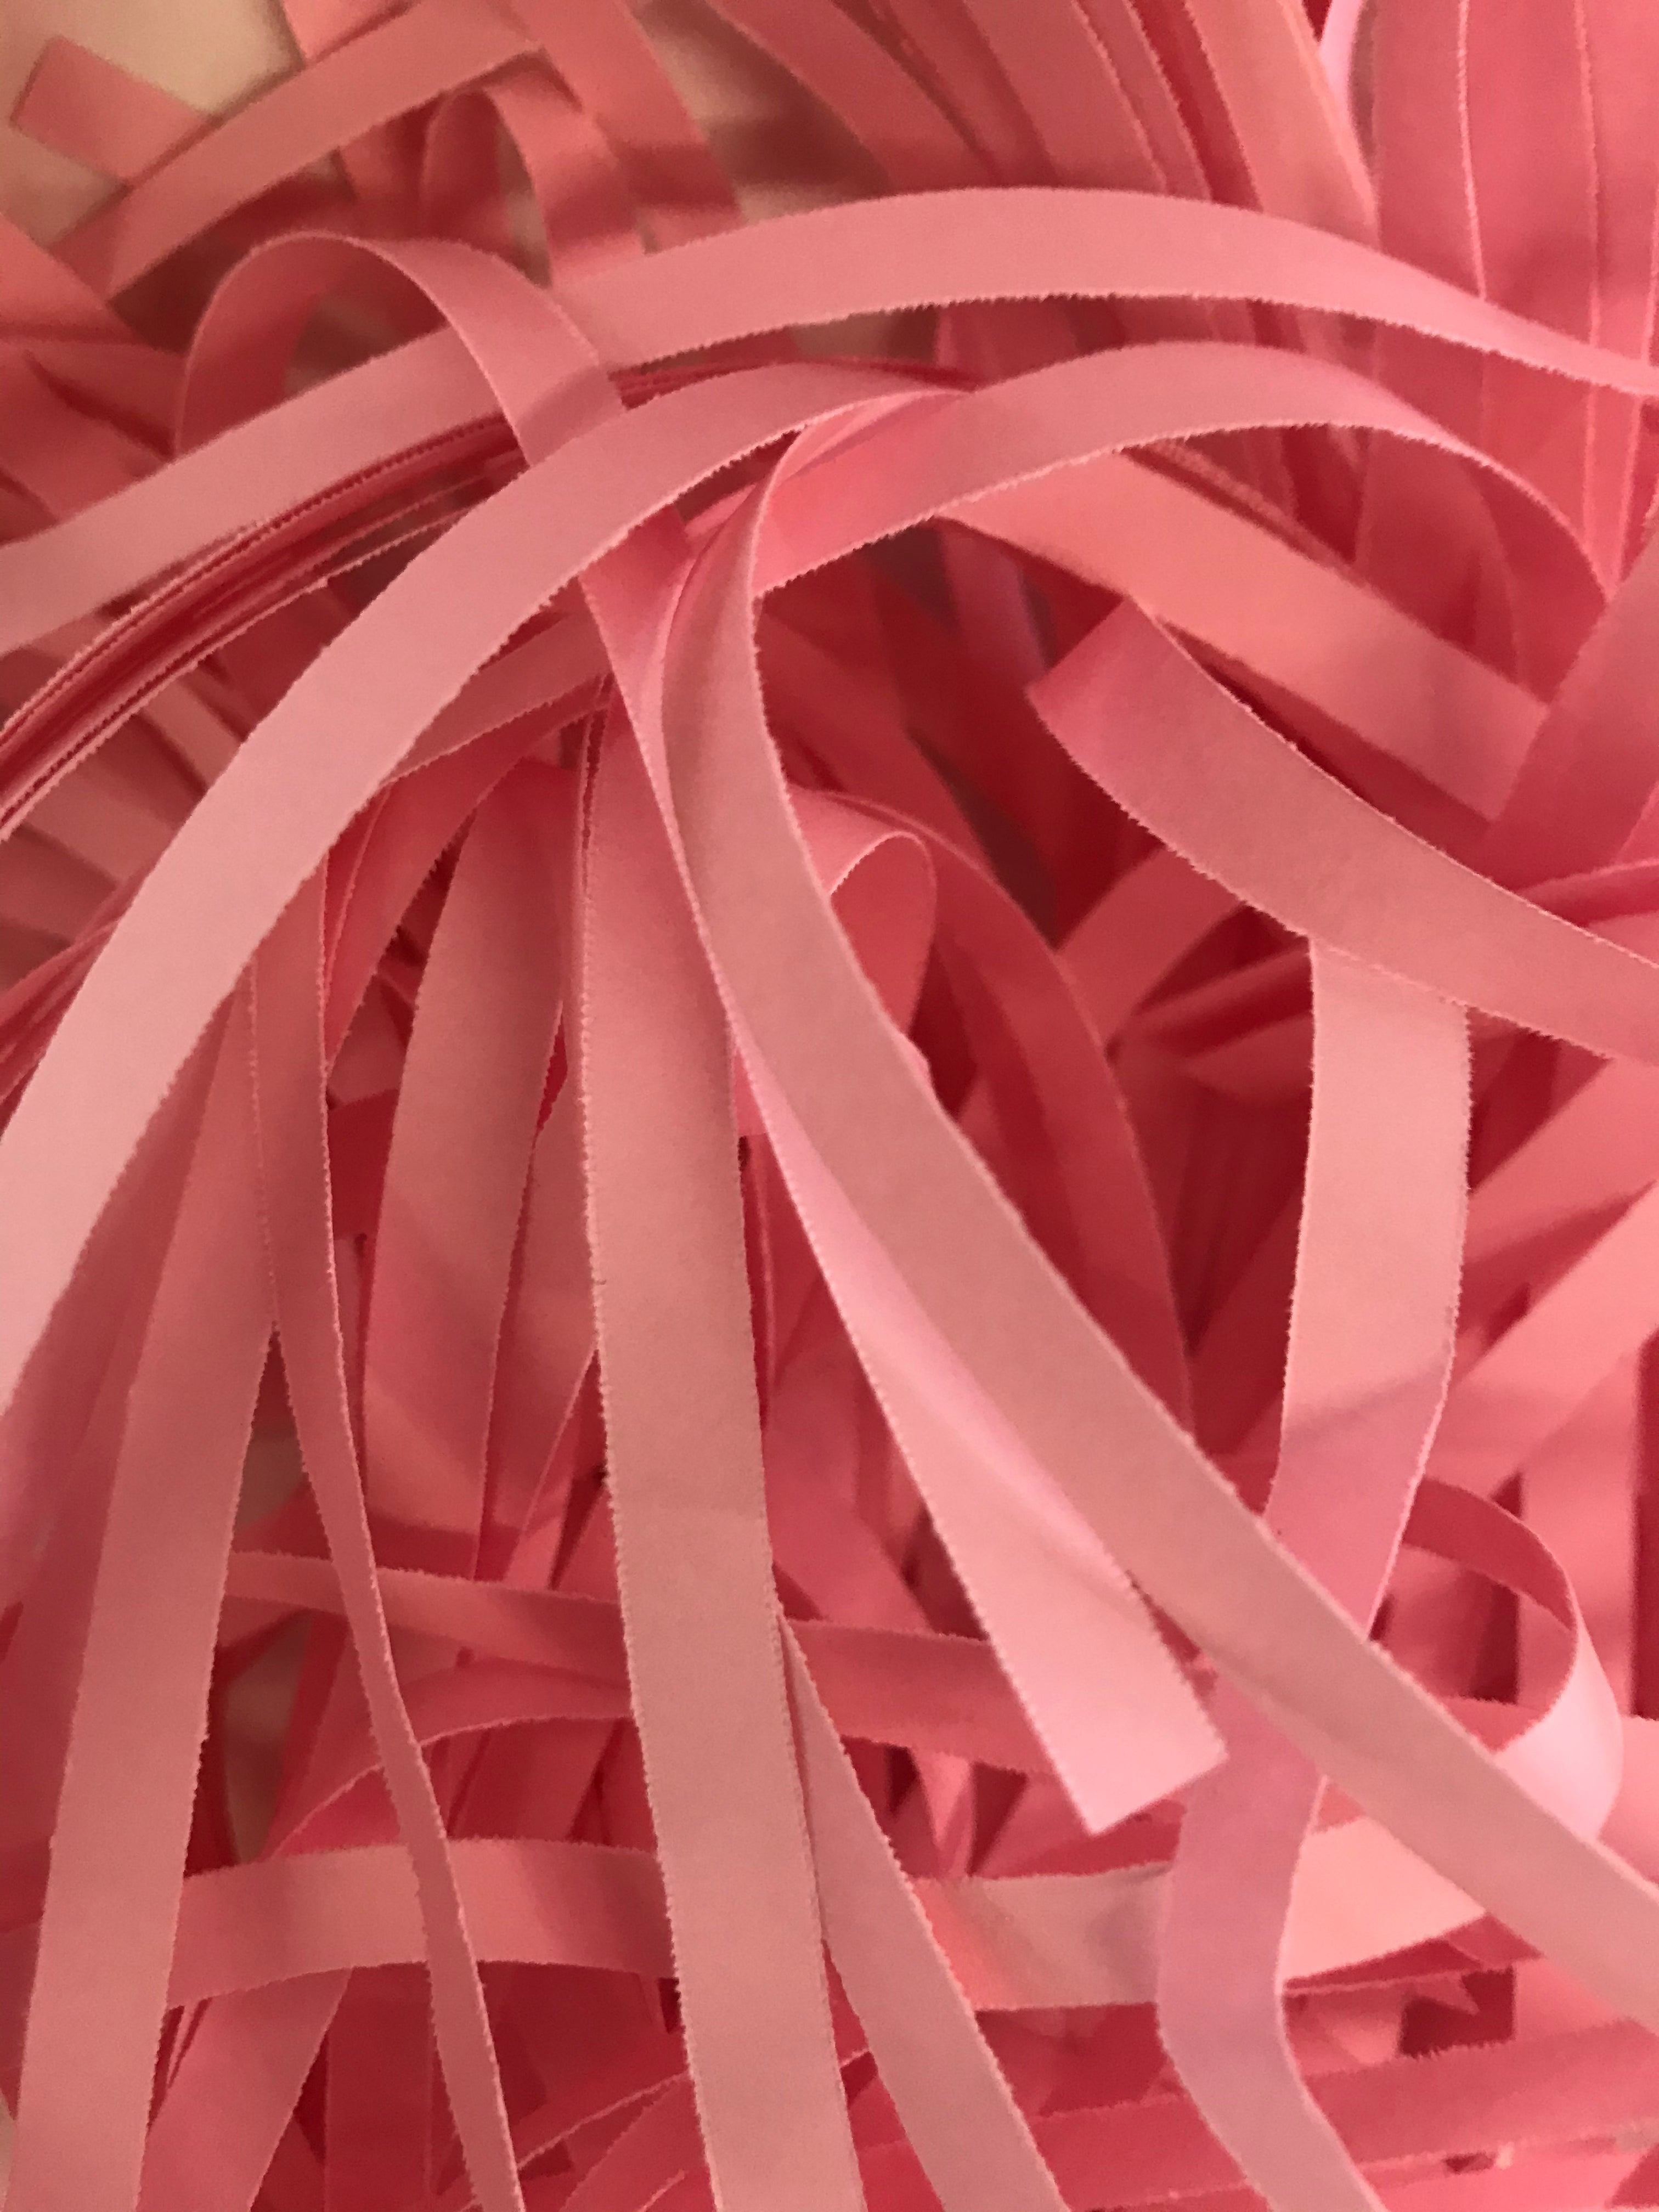 Pink Thick Shredded Paper